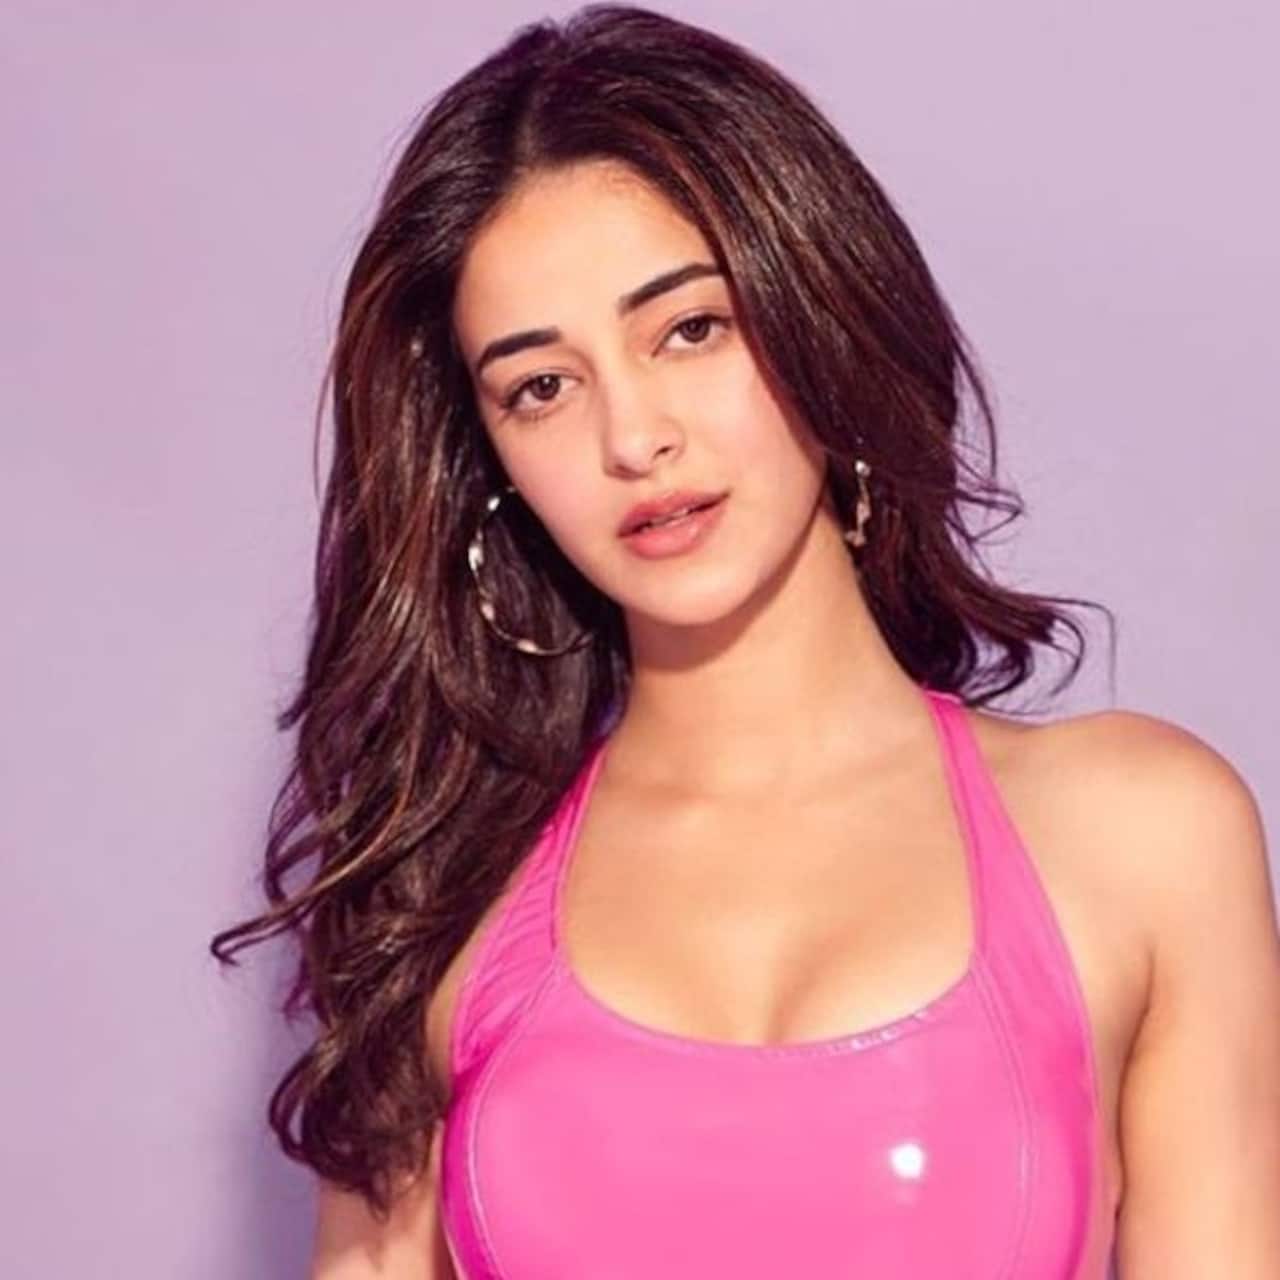 Ananya Panday allowed to go home after three hours of intense grilling by Sameer Wankhede; told officers that she was unaware of weed being a drug